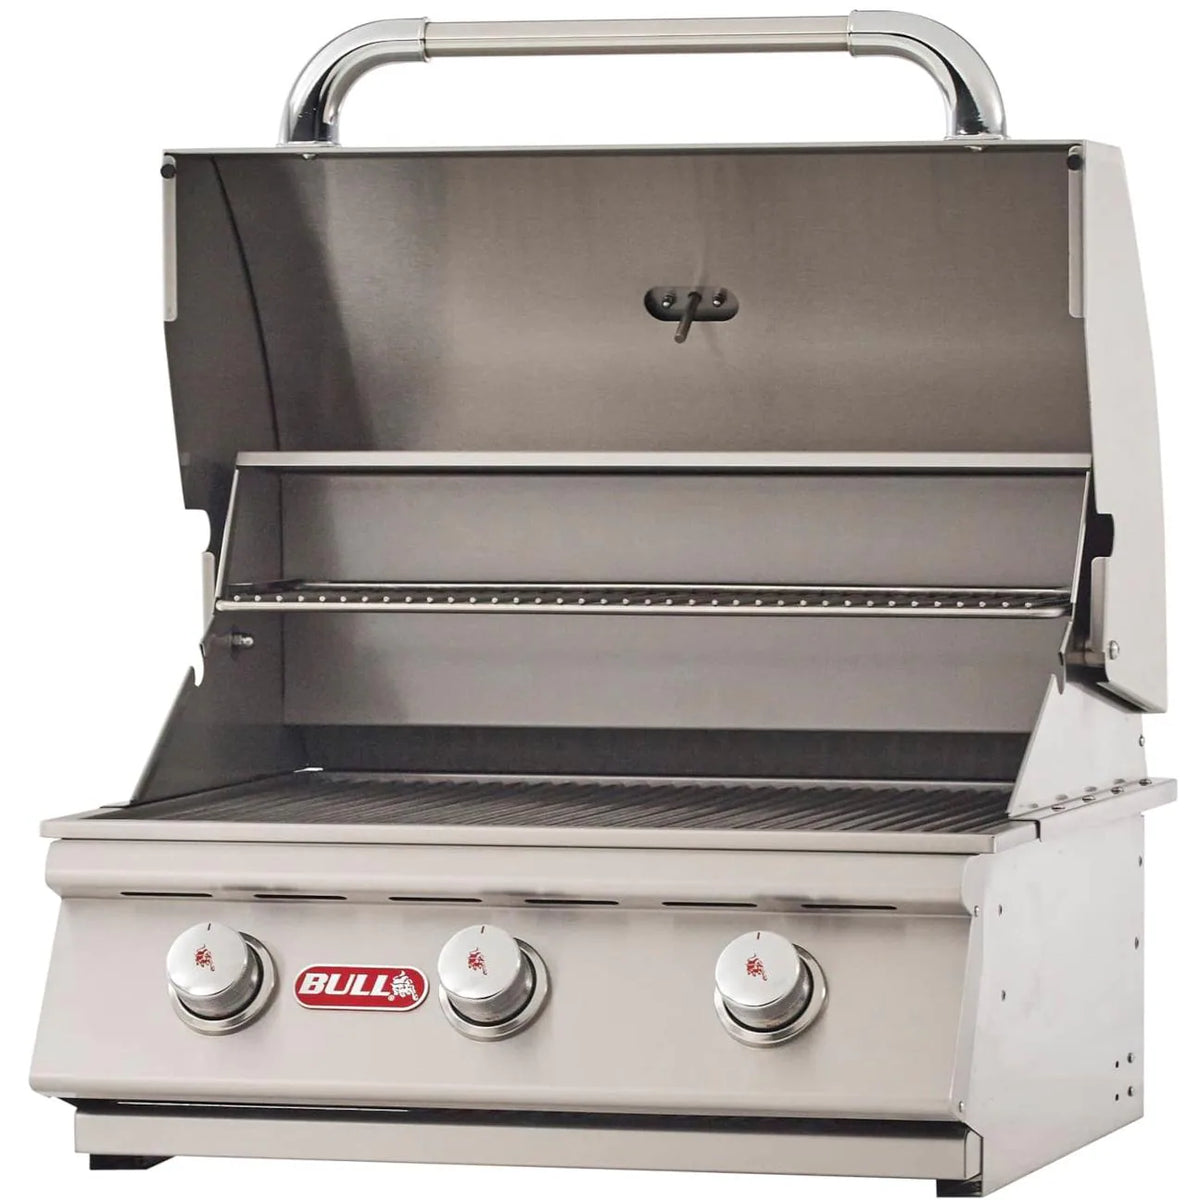 Bull 69008 Steer 25-Inch 3-Burner Built-In Gas Grill - Angled View With Hood Open